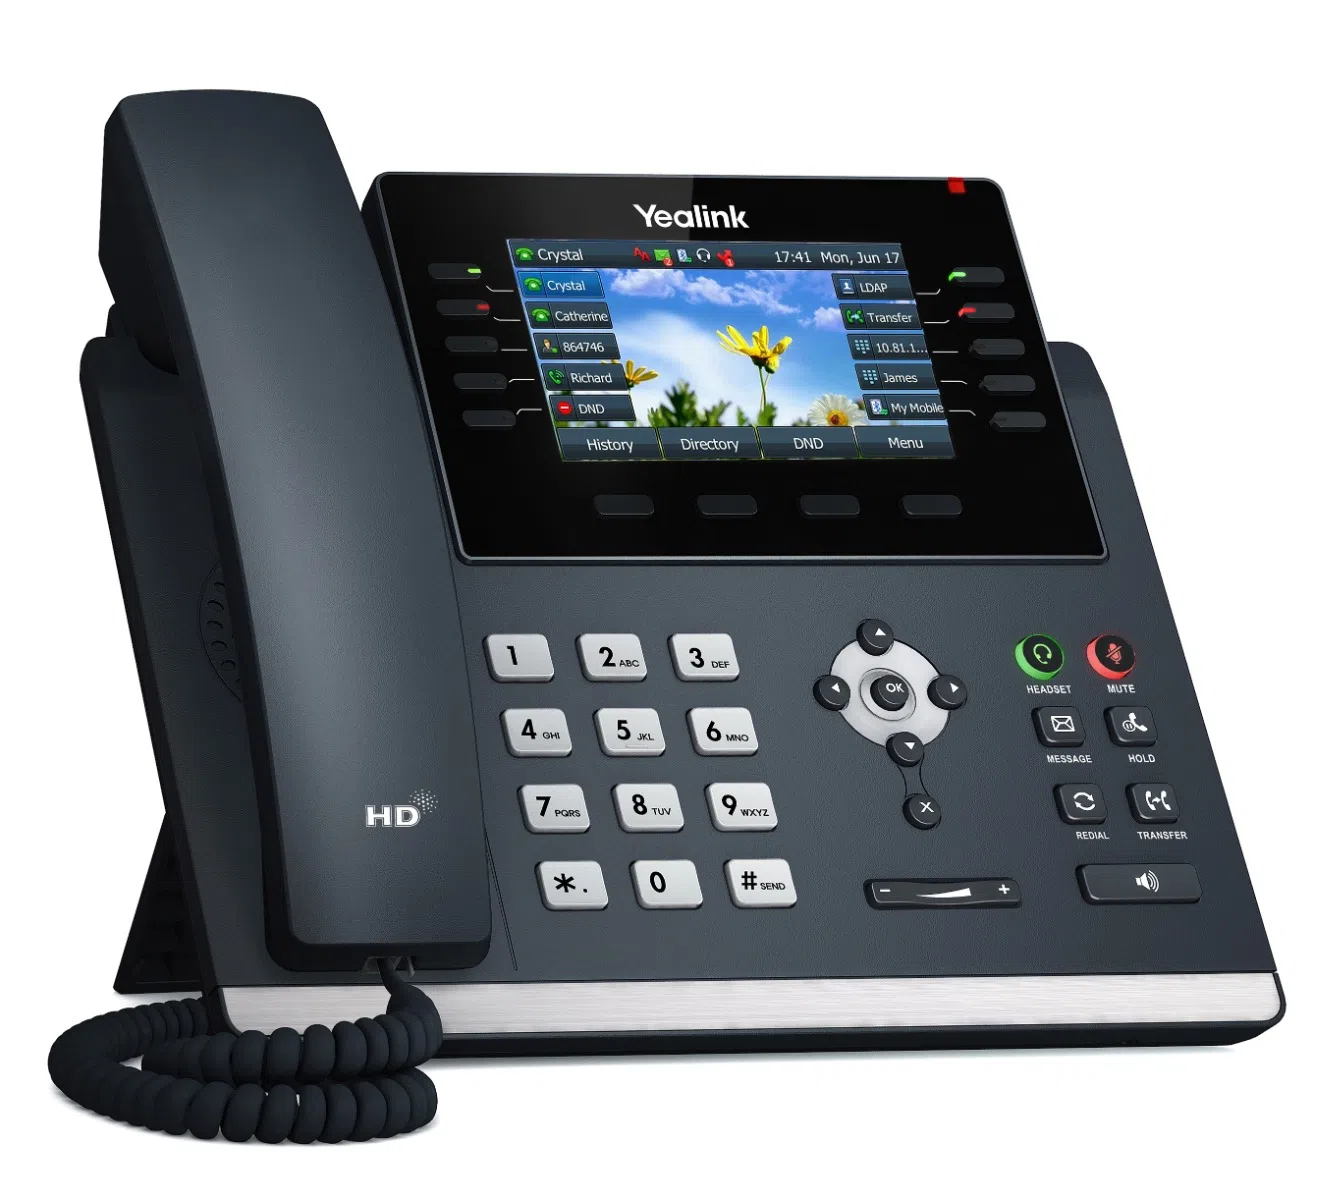 Can I connect the Yealink SIP-T46U IP phone to Wi-Fi?